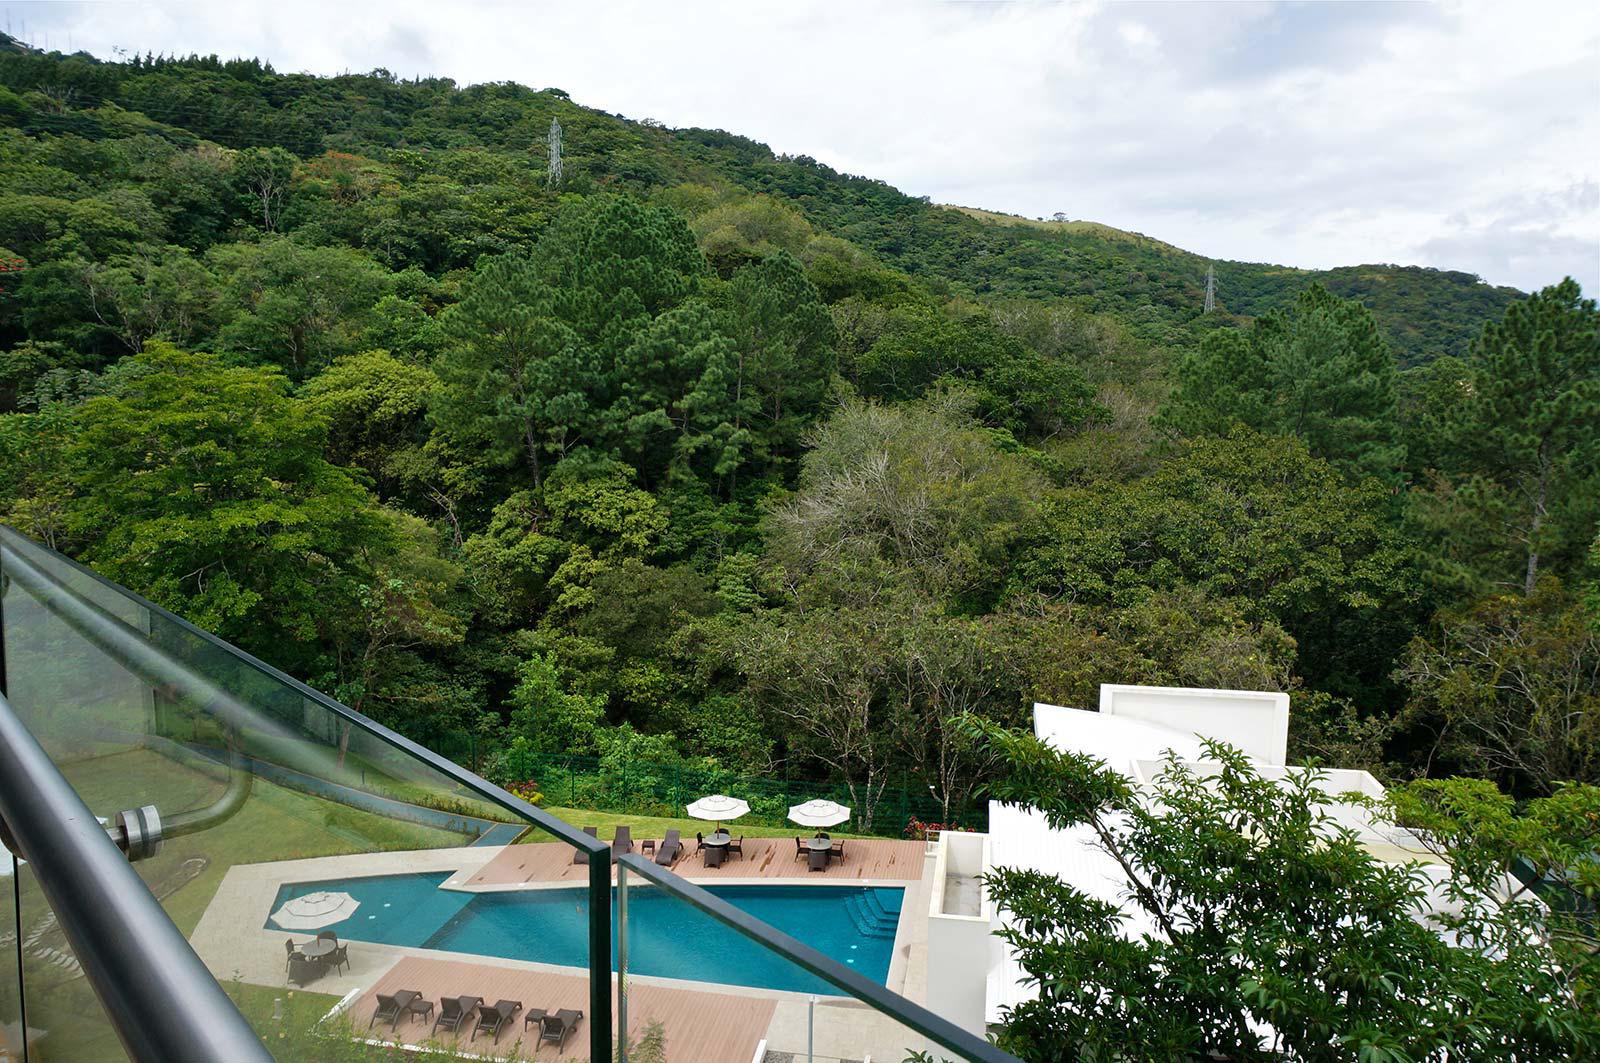 for sale real estate in costarica, apartament with spectacular views, landscape surrounded apartament for sale and rent, eco-friendly apartment with two bedroom